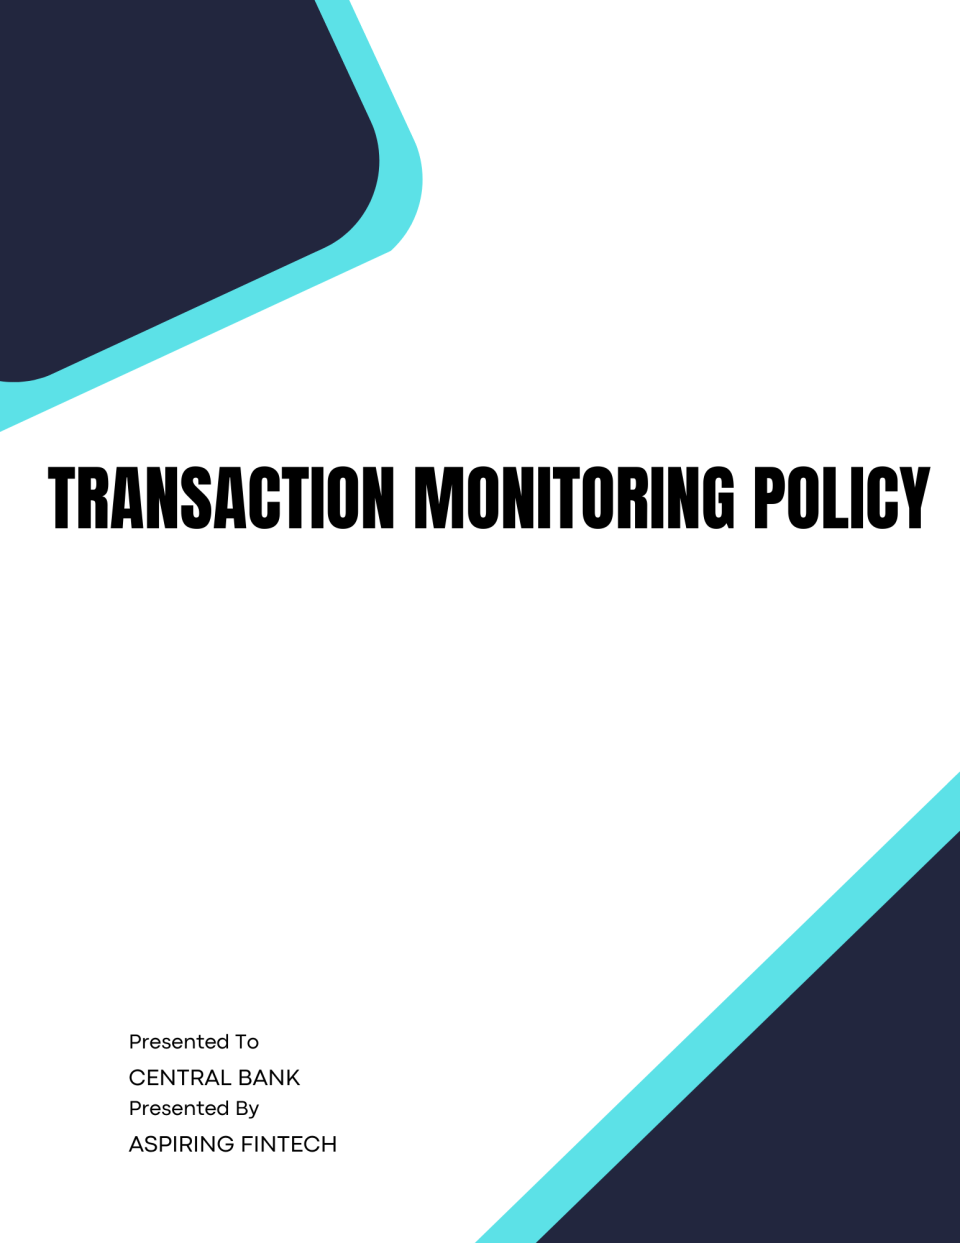 Transaction Monitoring Policy Template